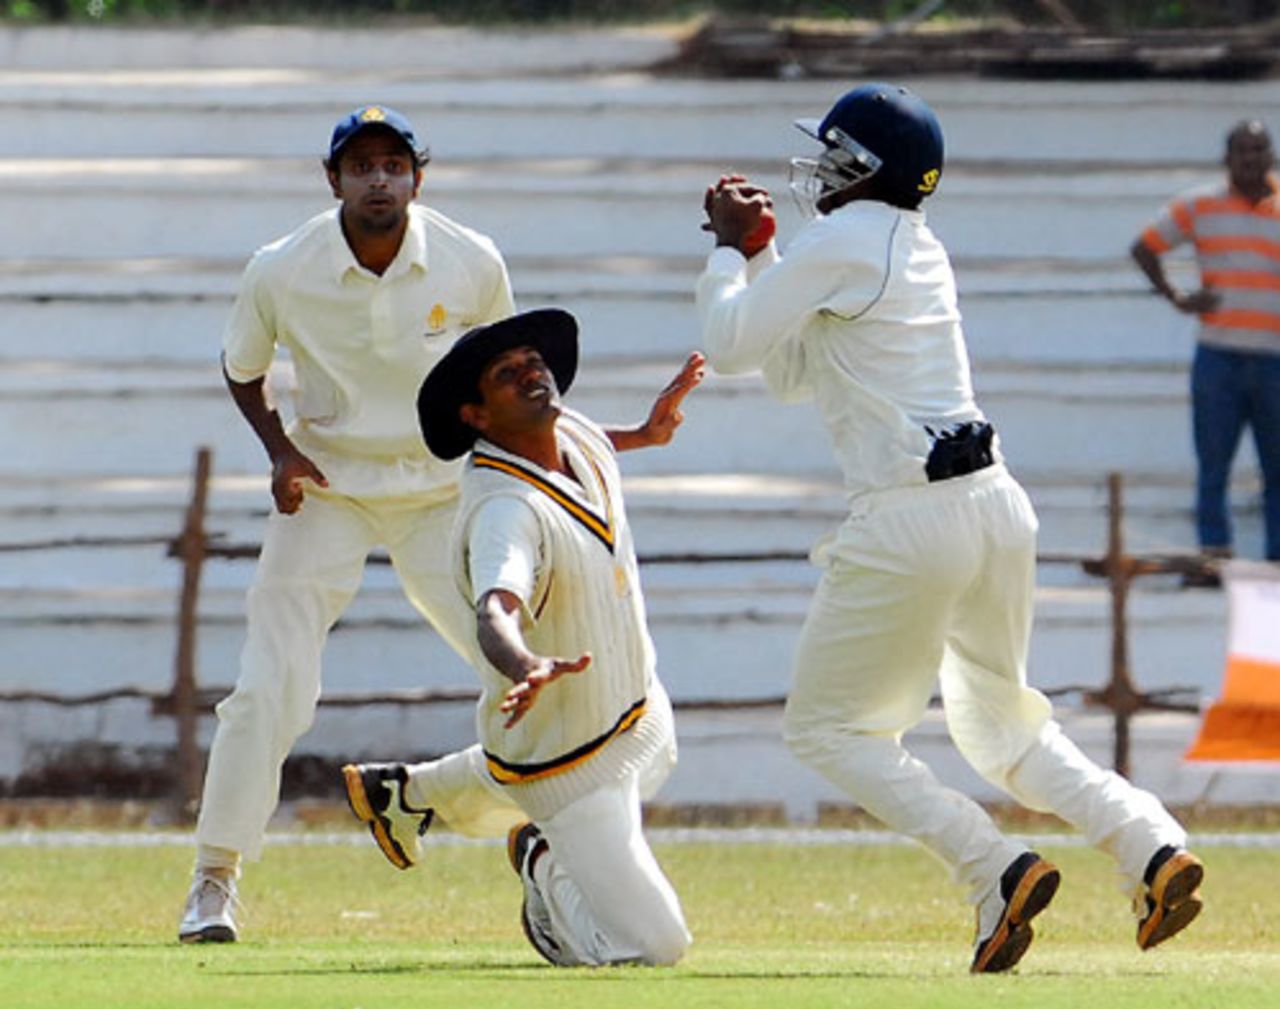 Karnatak's KB Pawan latches on to a close-in catch, Karnataka v Rajasthan, Ranji Trophy Super League, Group A, 4th round, 4th day, Mysore, December 4, 2007